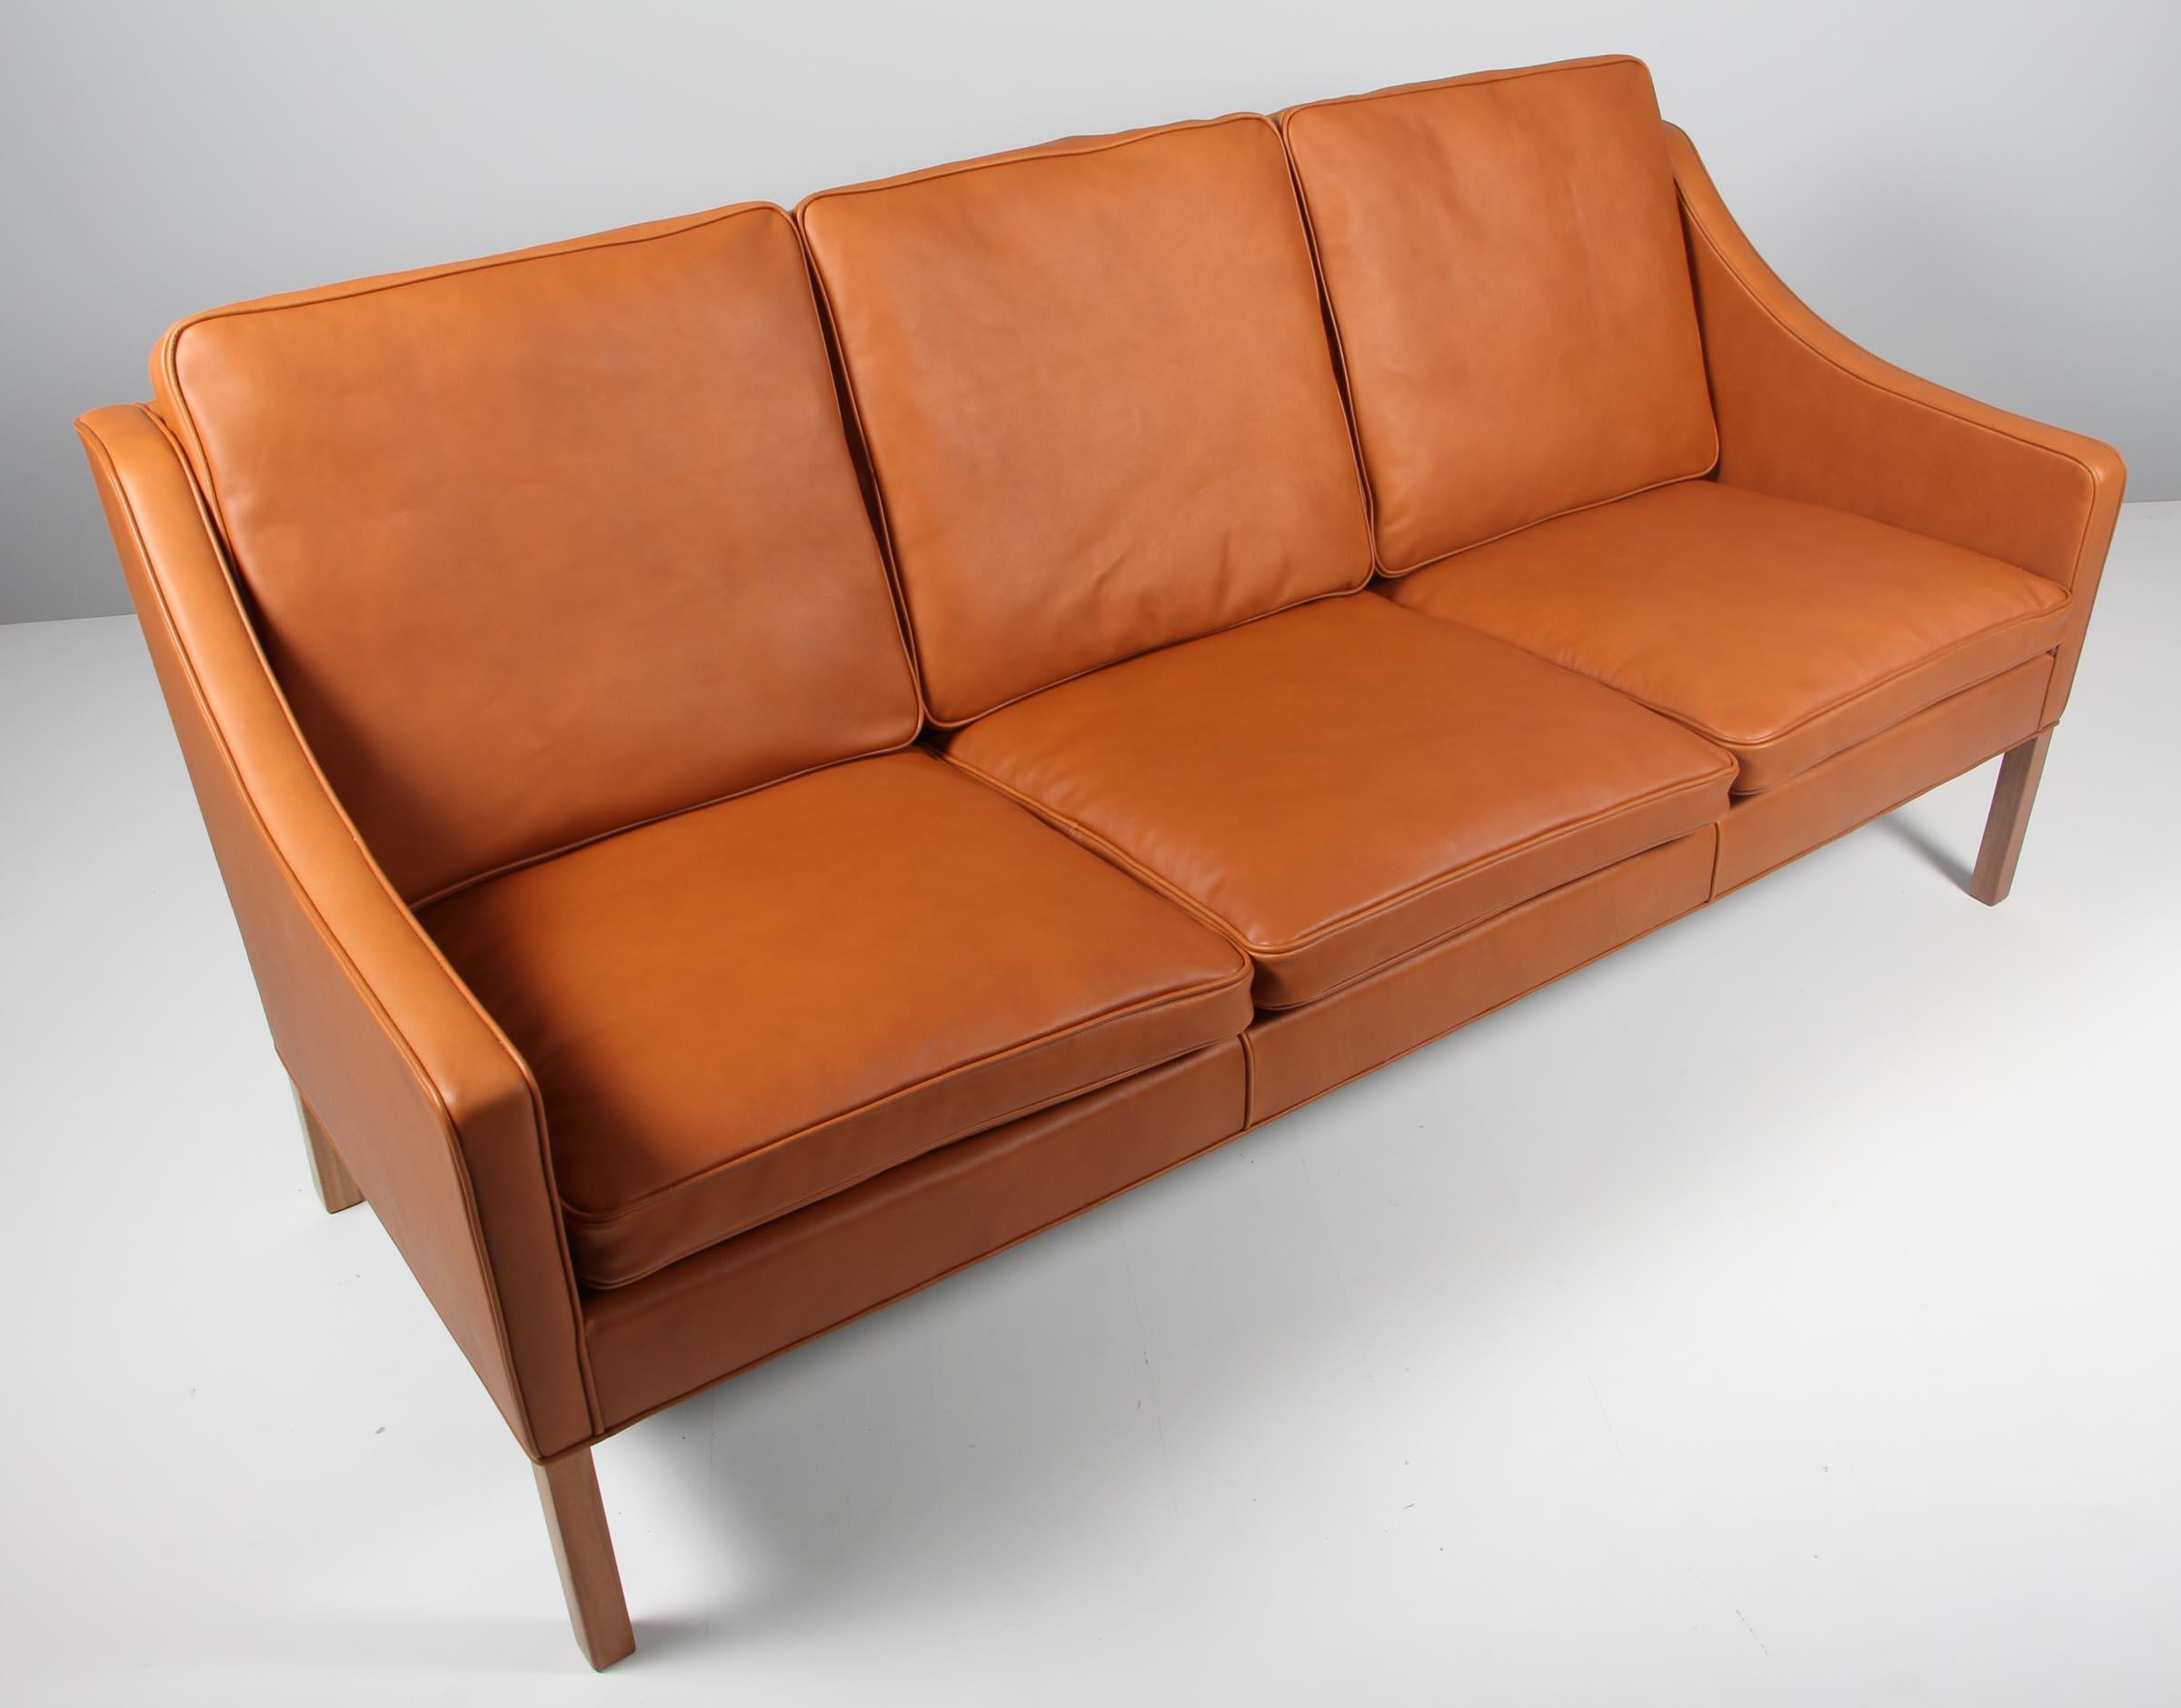 Børge Mogensen three-seat sofa new upholstery with walnut elegance aniline leather.

Legs of walnut.

Model 2209, made by Fredericia furniture.